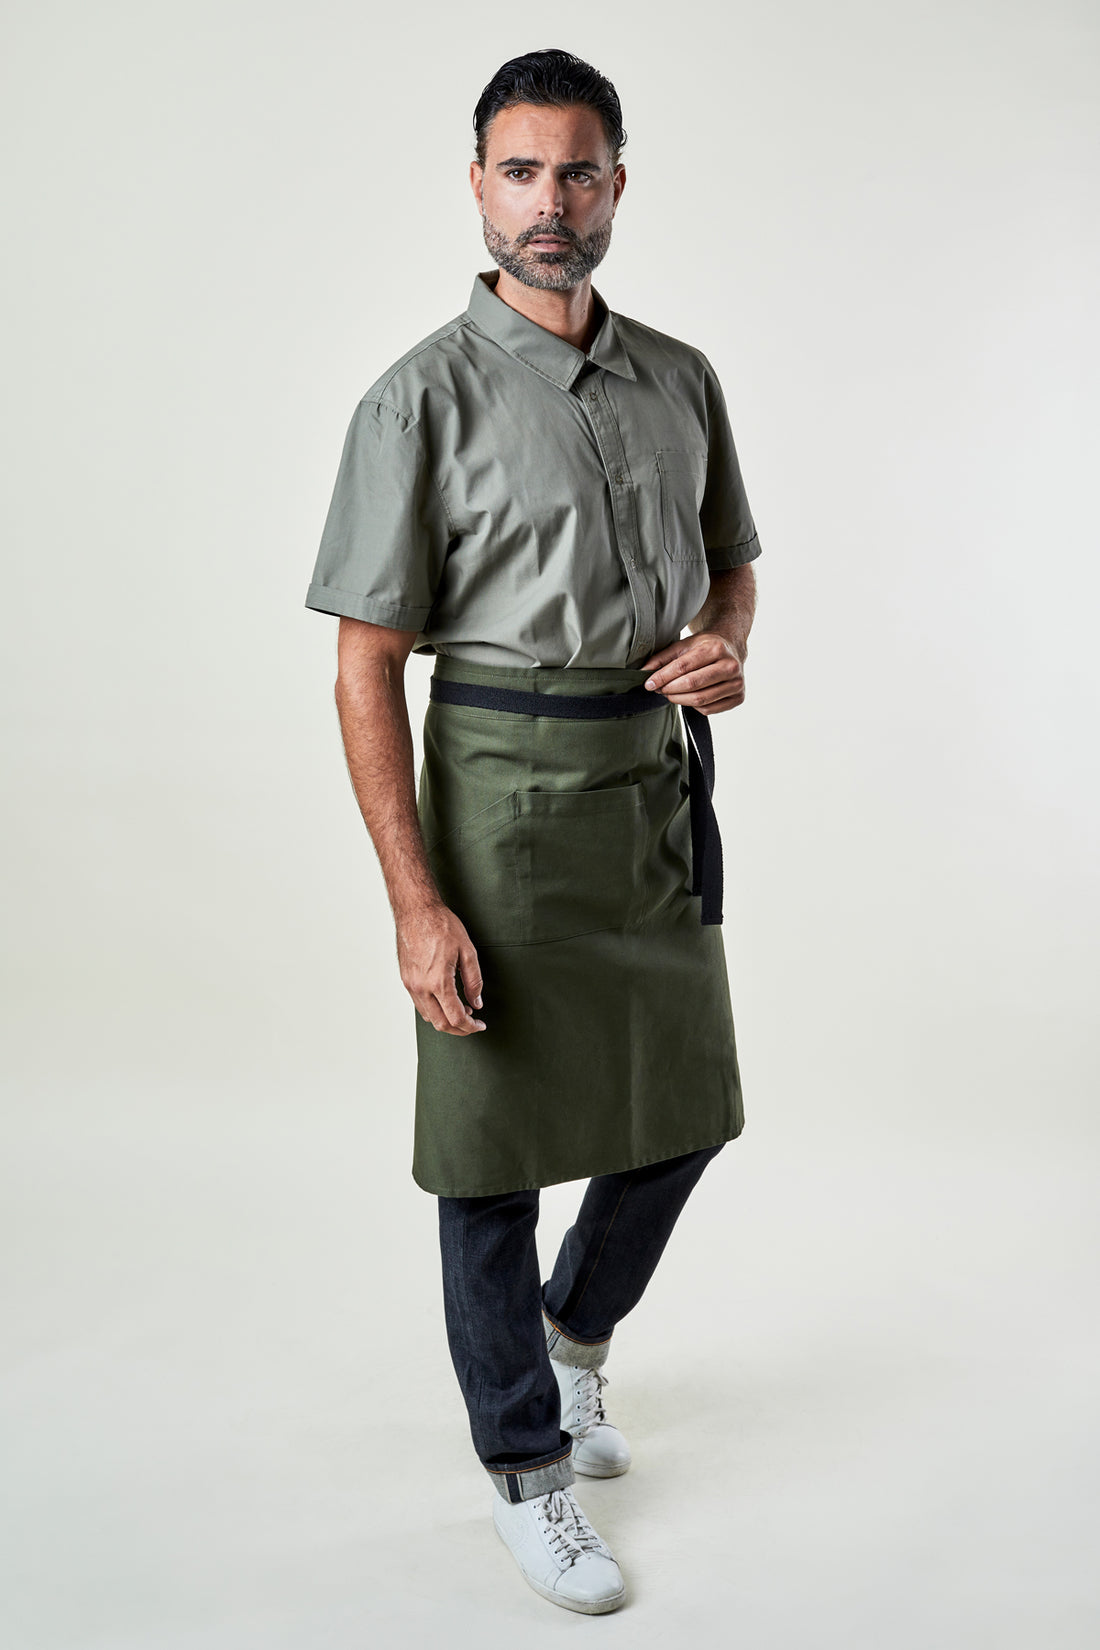 Image of person wearing Franklin Bistro Apron in Olive Canvas. | BlueCut Aprons				